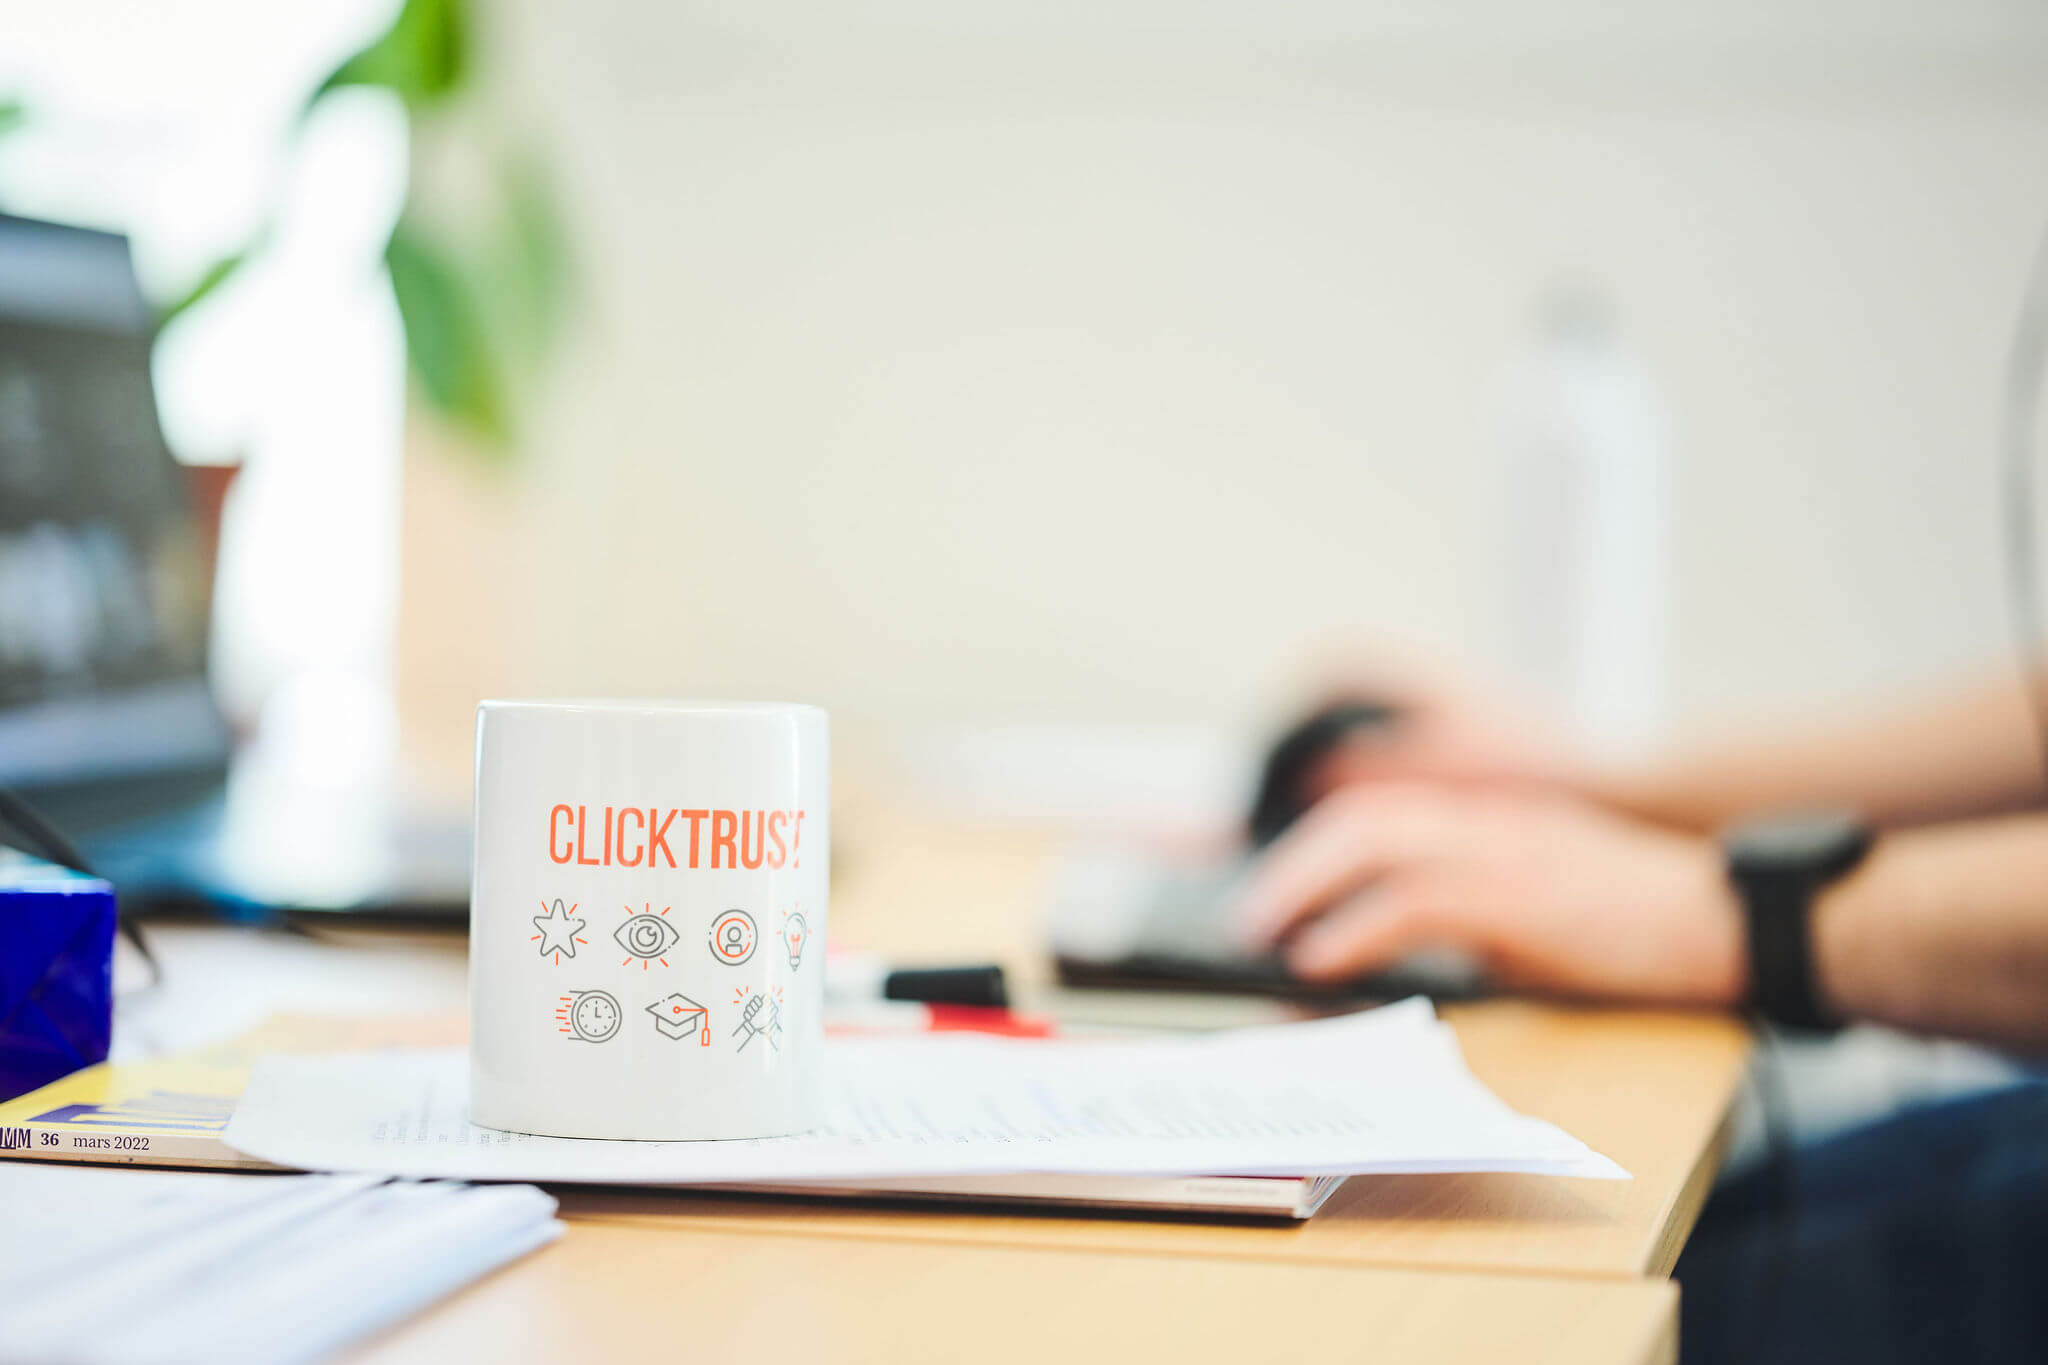 The CLICKTRUST monthly pick – May 2022